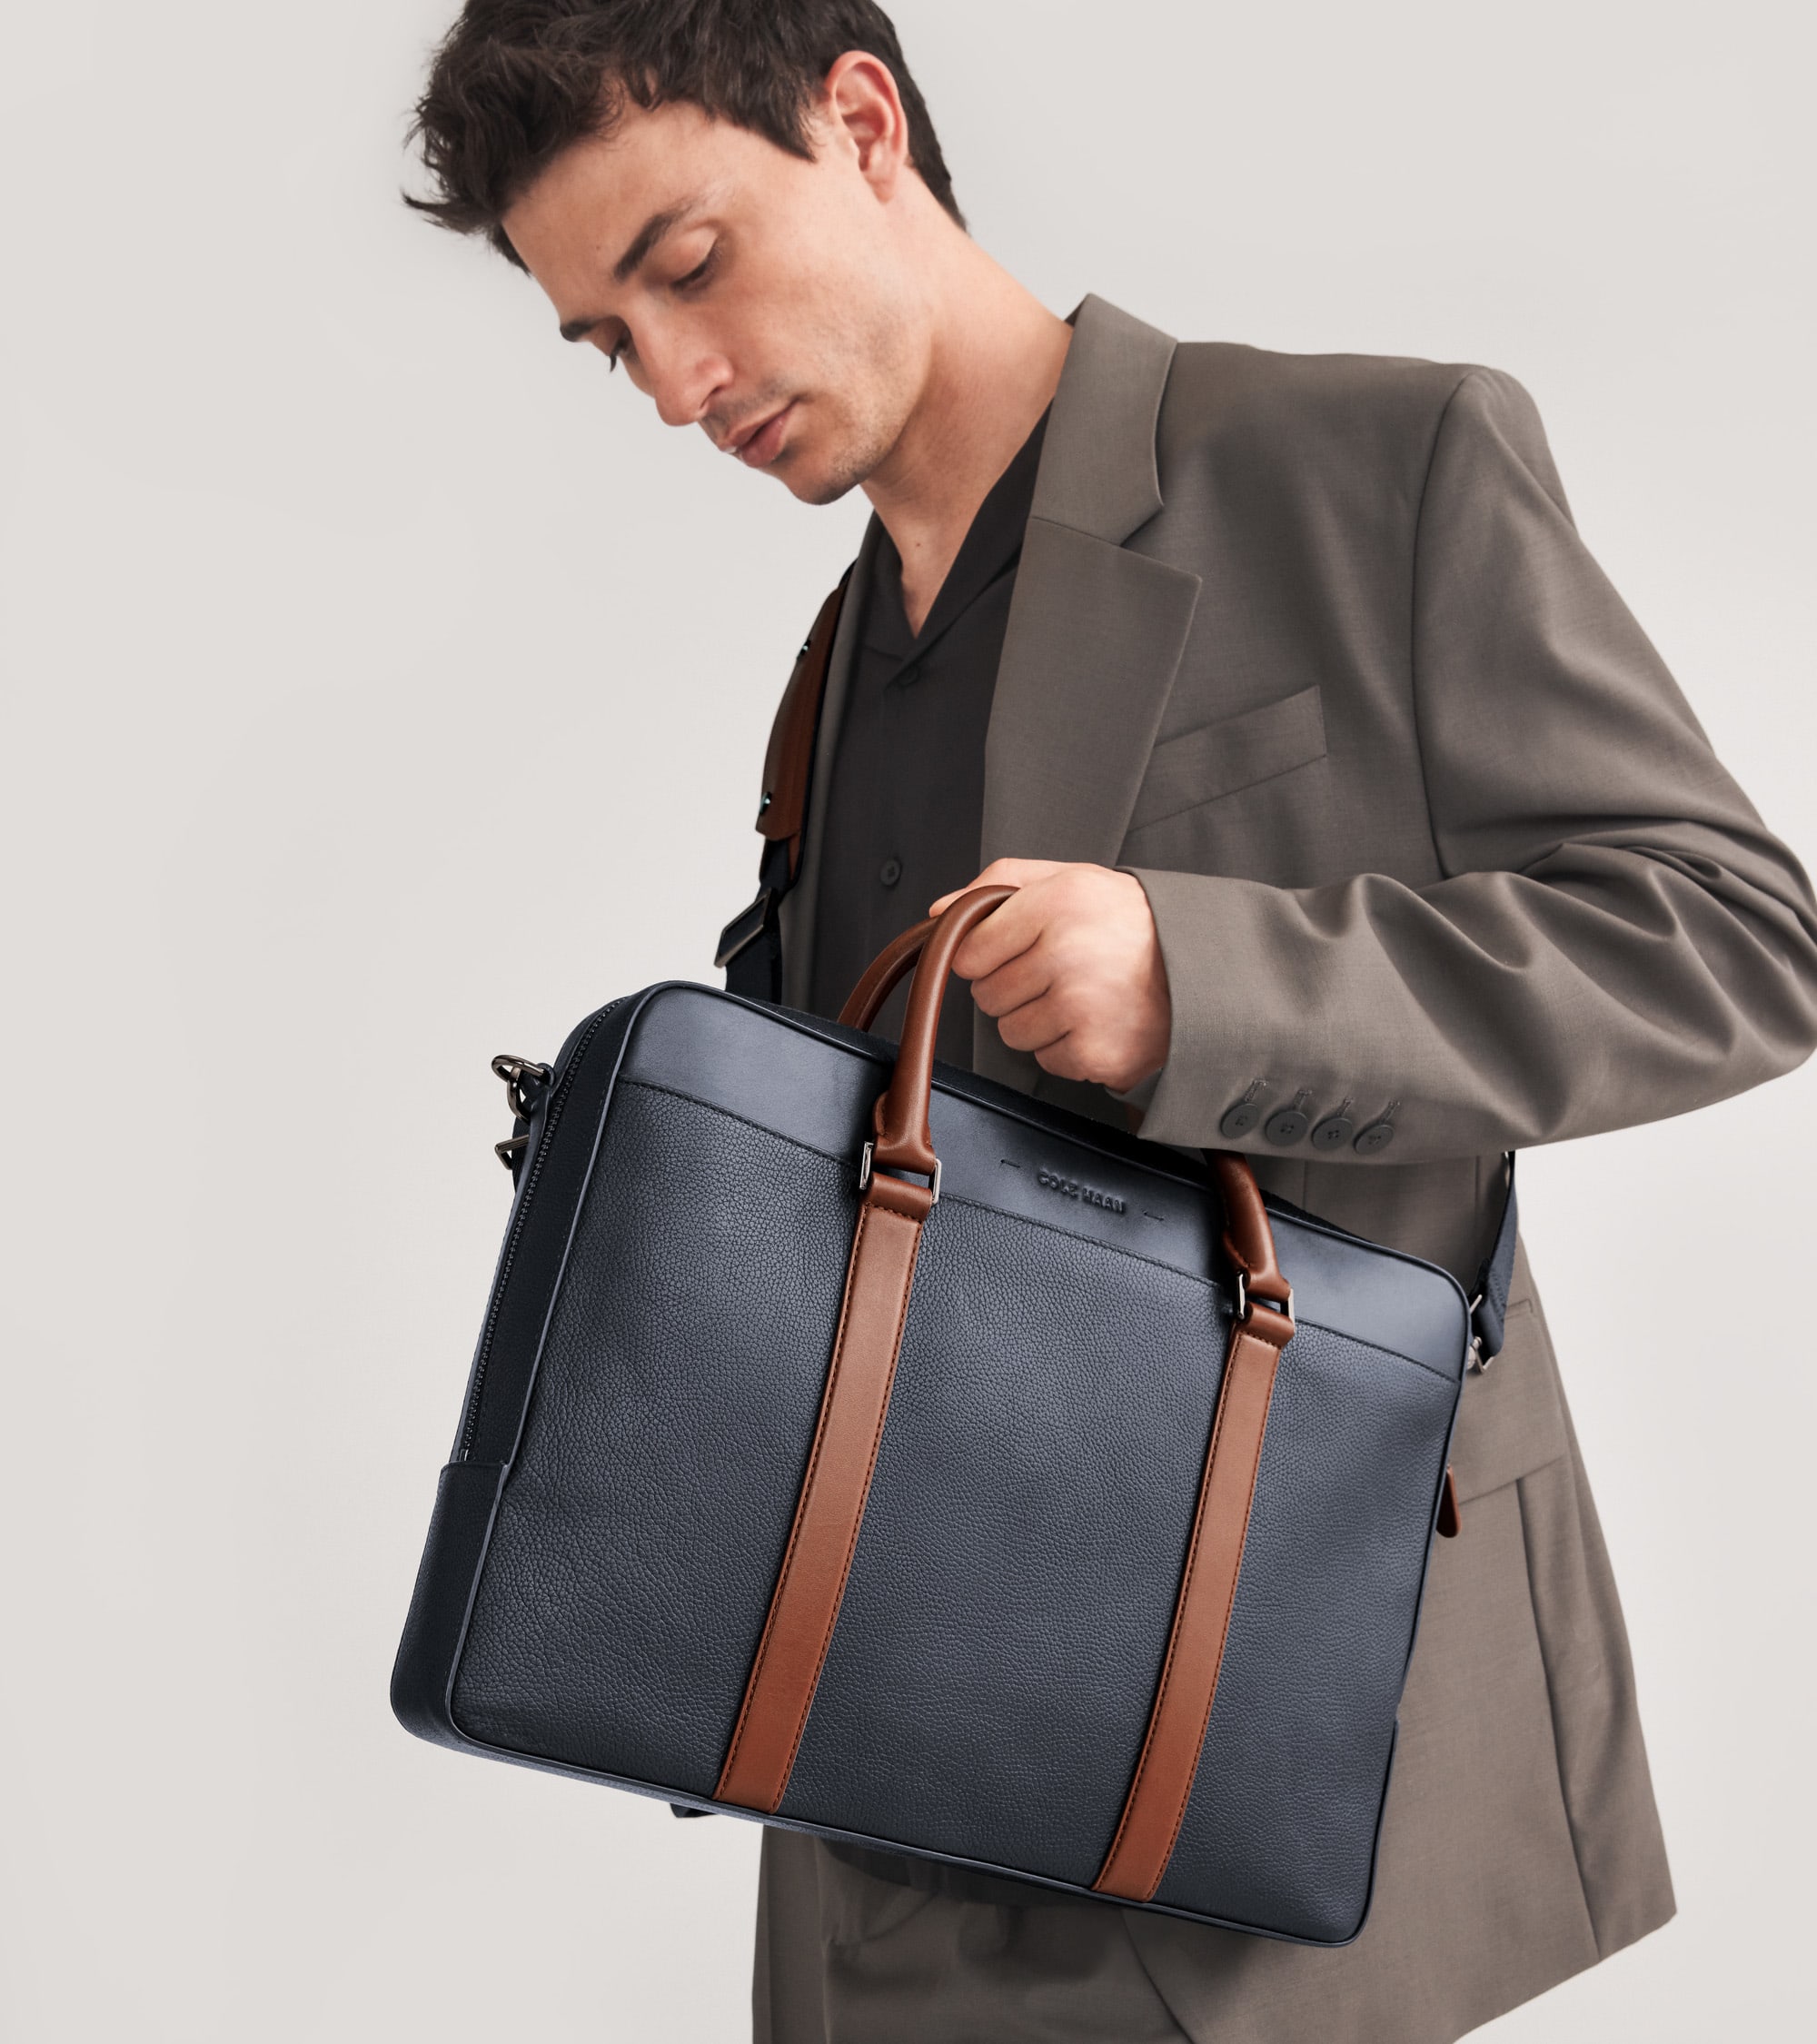 Male model with a work bag